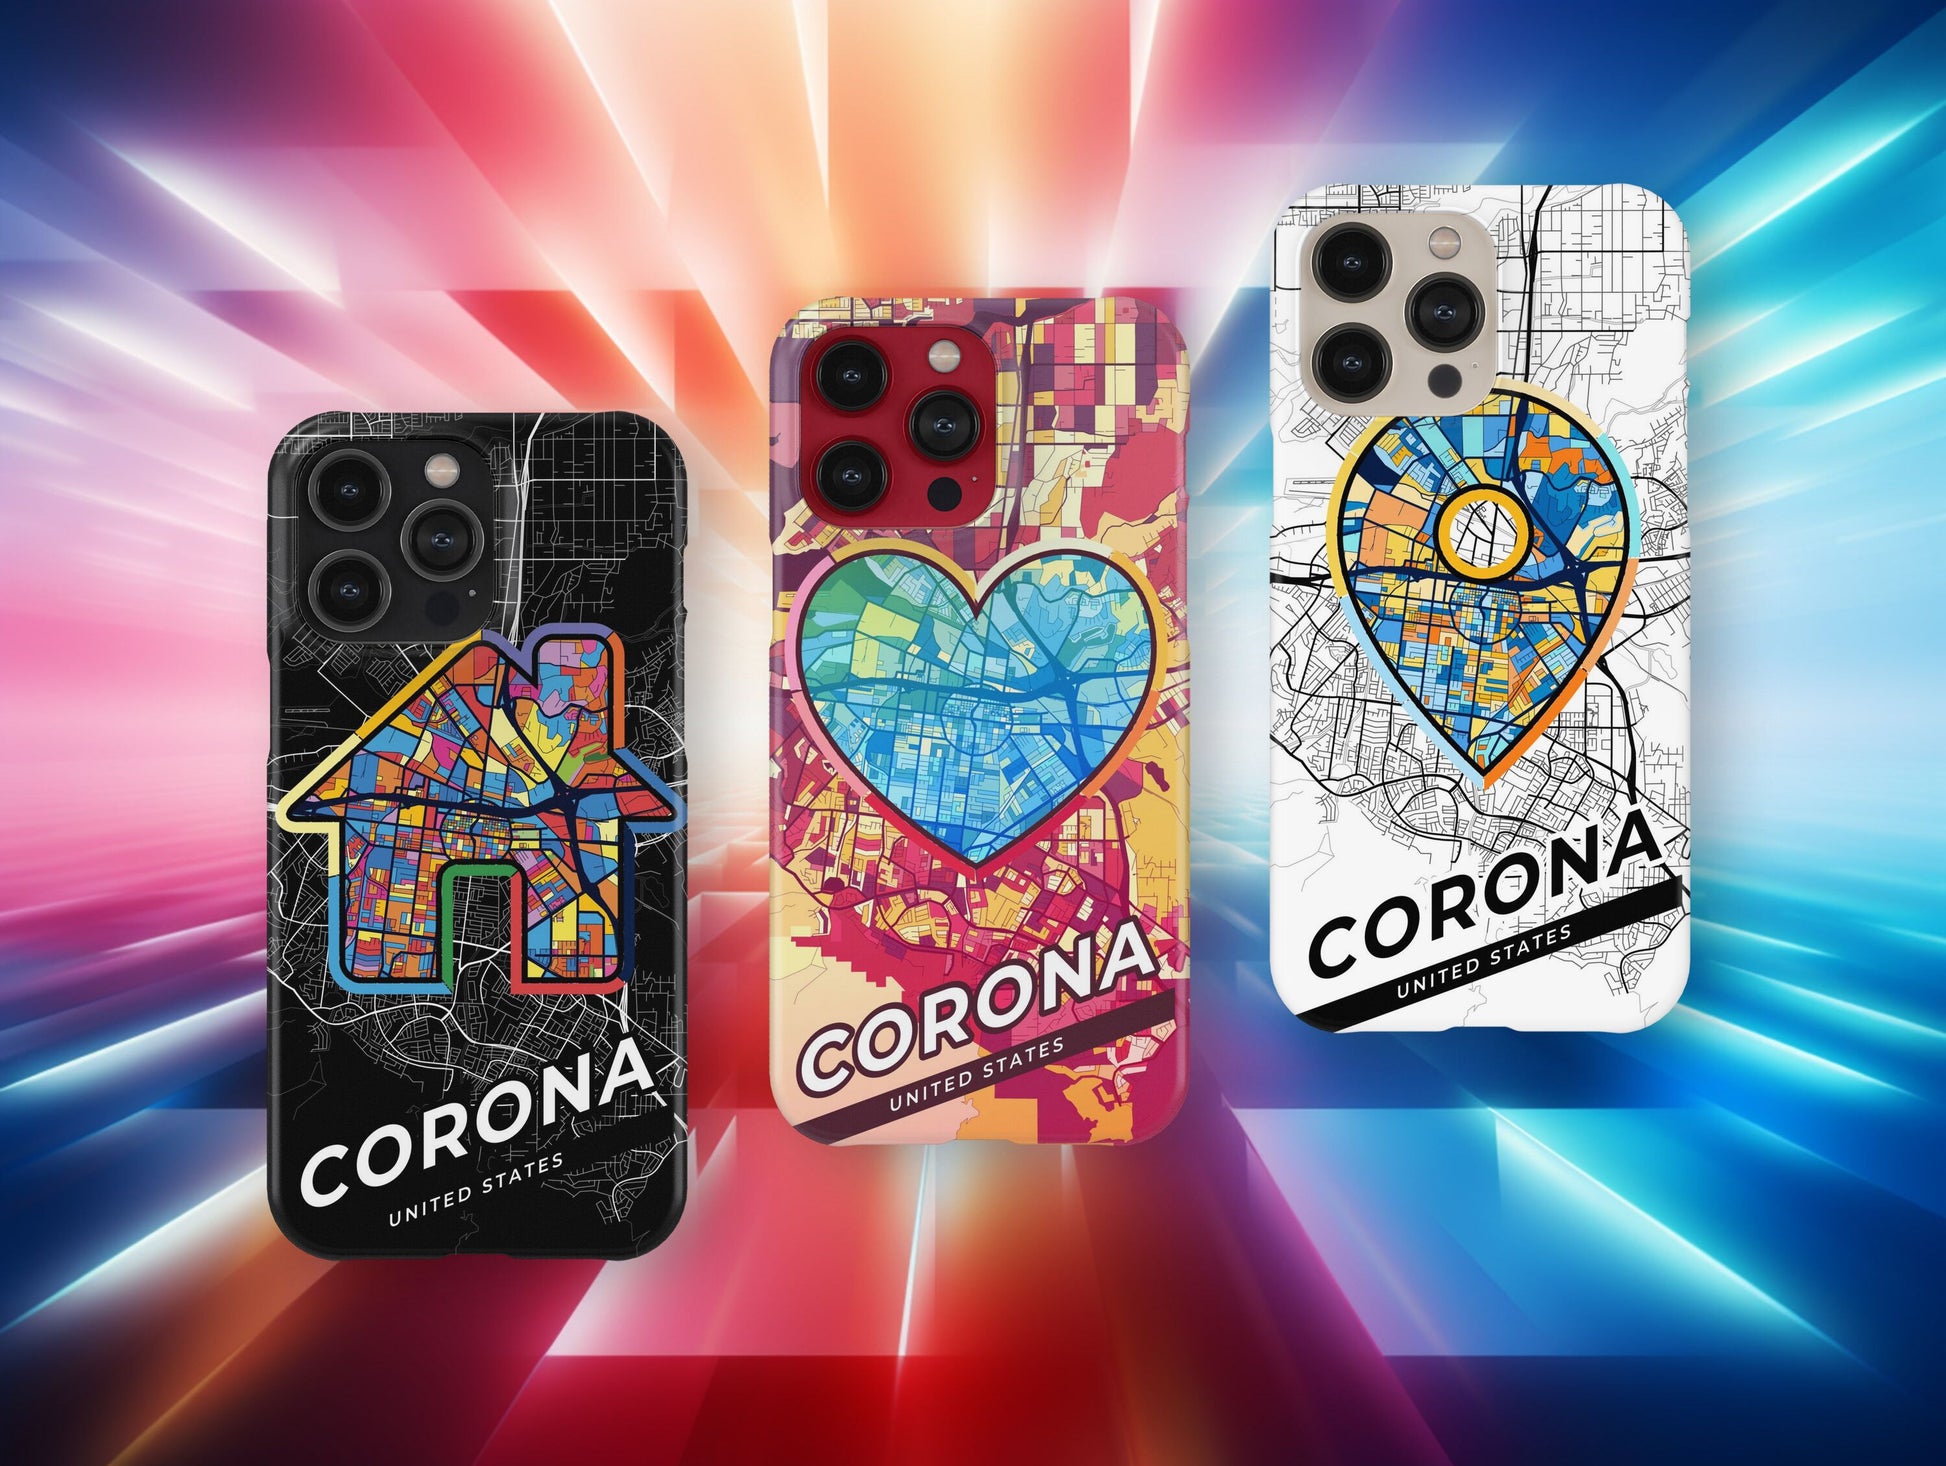 Corona California slim phone case with colorful icon. Birthday, wedding or housewarming gift. Couple match cases.